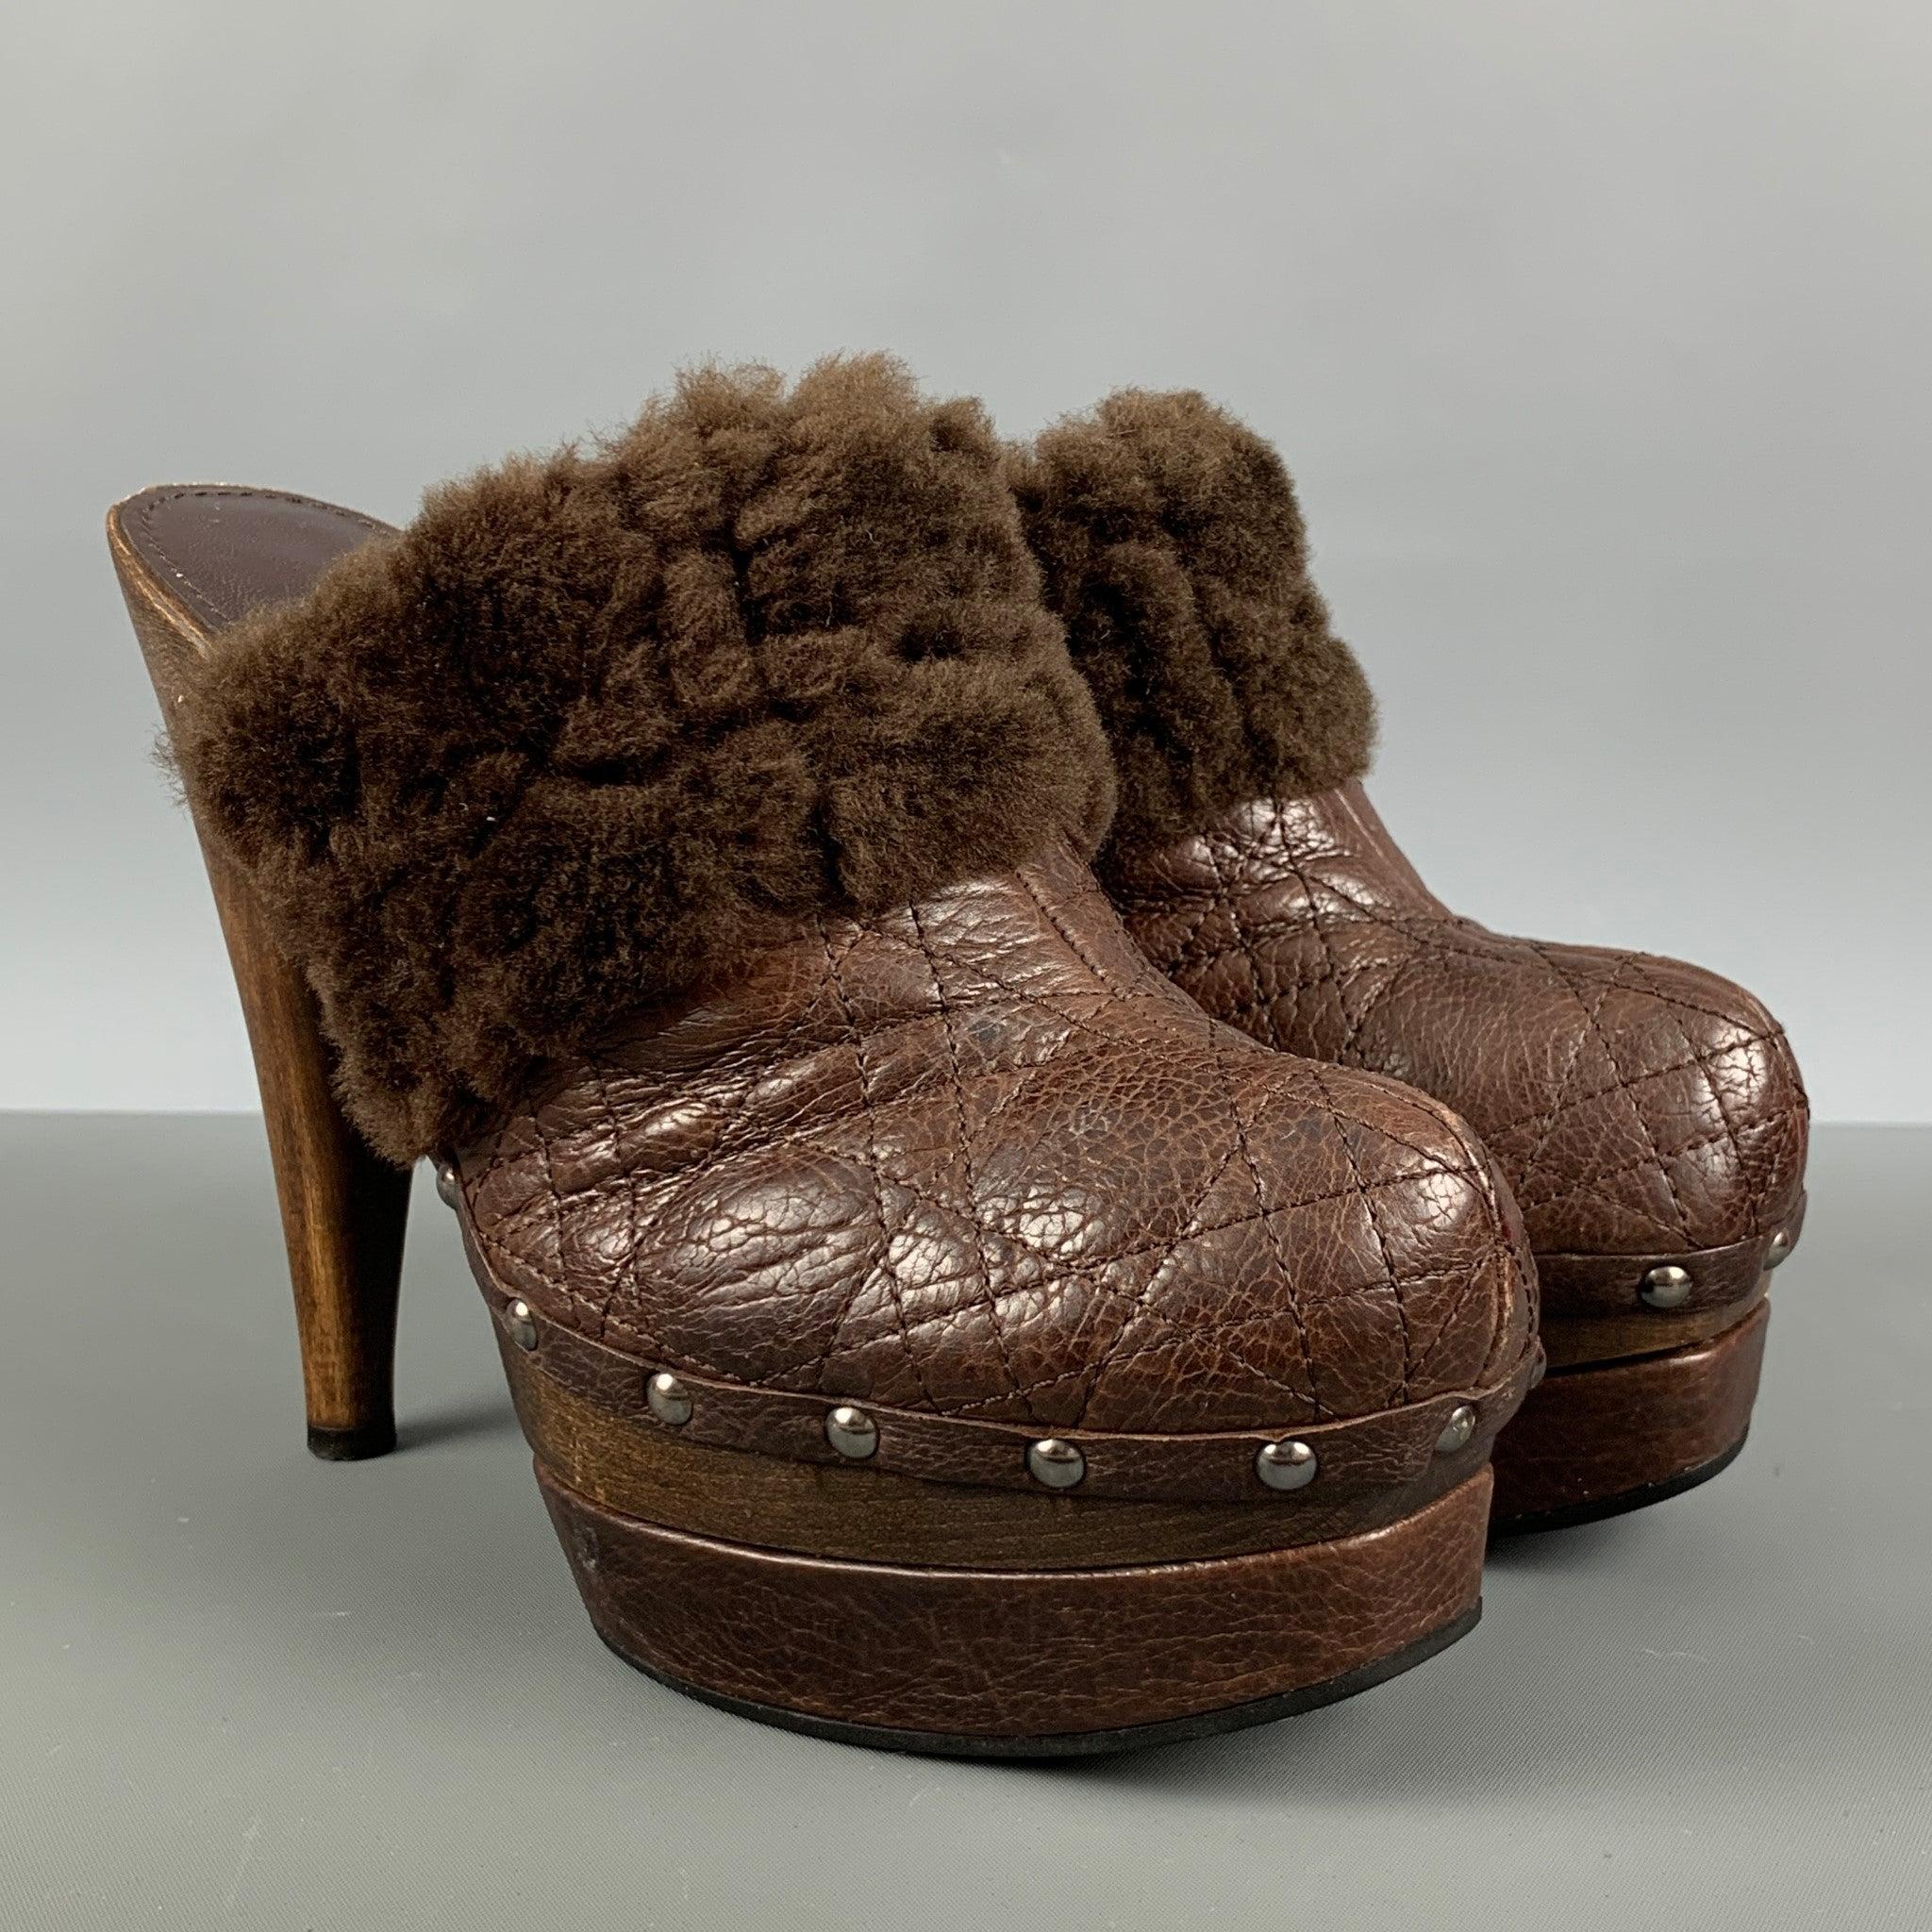 CHRISTIAN DIOR pumps comes in a brown leather featuring a quilted style, brown shearling lining, silver studded detail and platform style. Made in Italy.Very Good Pre-Owned Condition. 

Marked:   38 

Measurements: 
  Heel: 6 inches Platform: 1.5